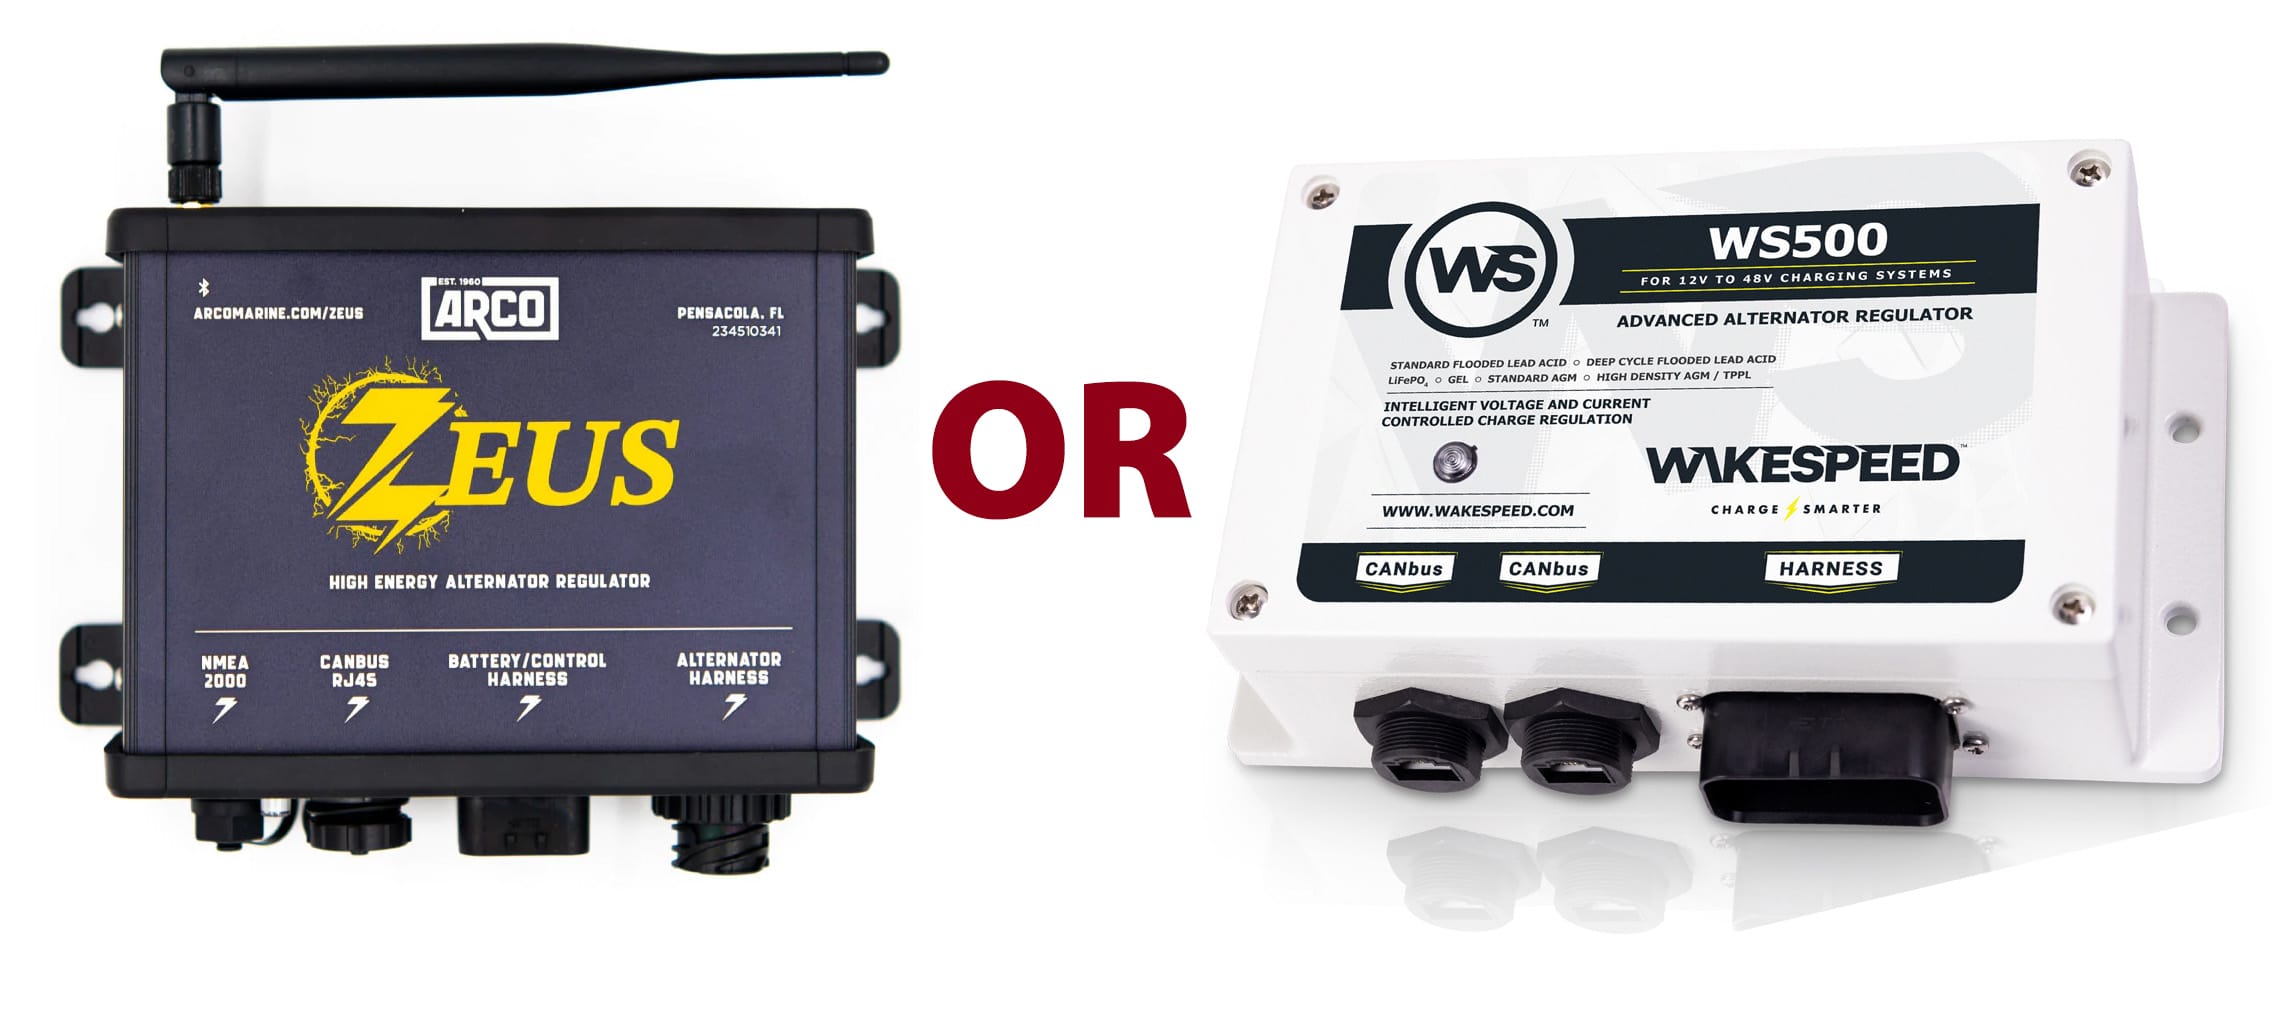 Wakespeed WS500 Compared To ARCO Zeus—What Matters